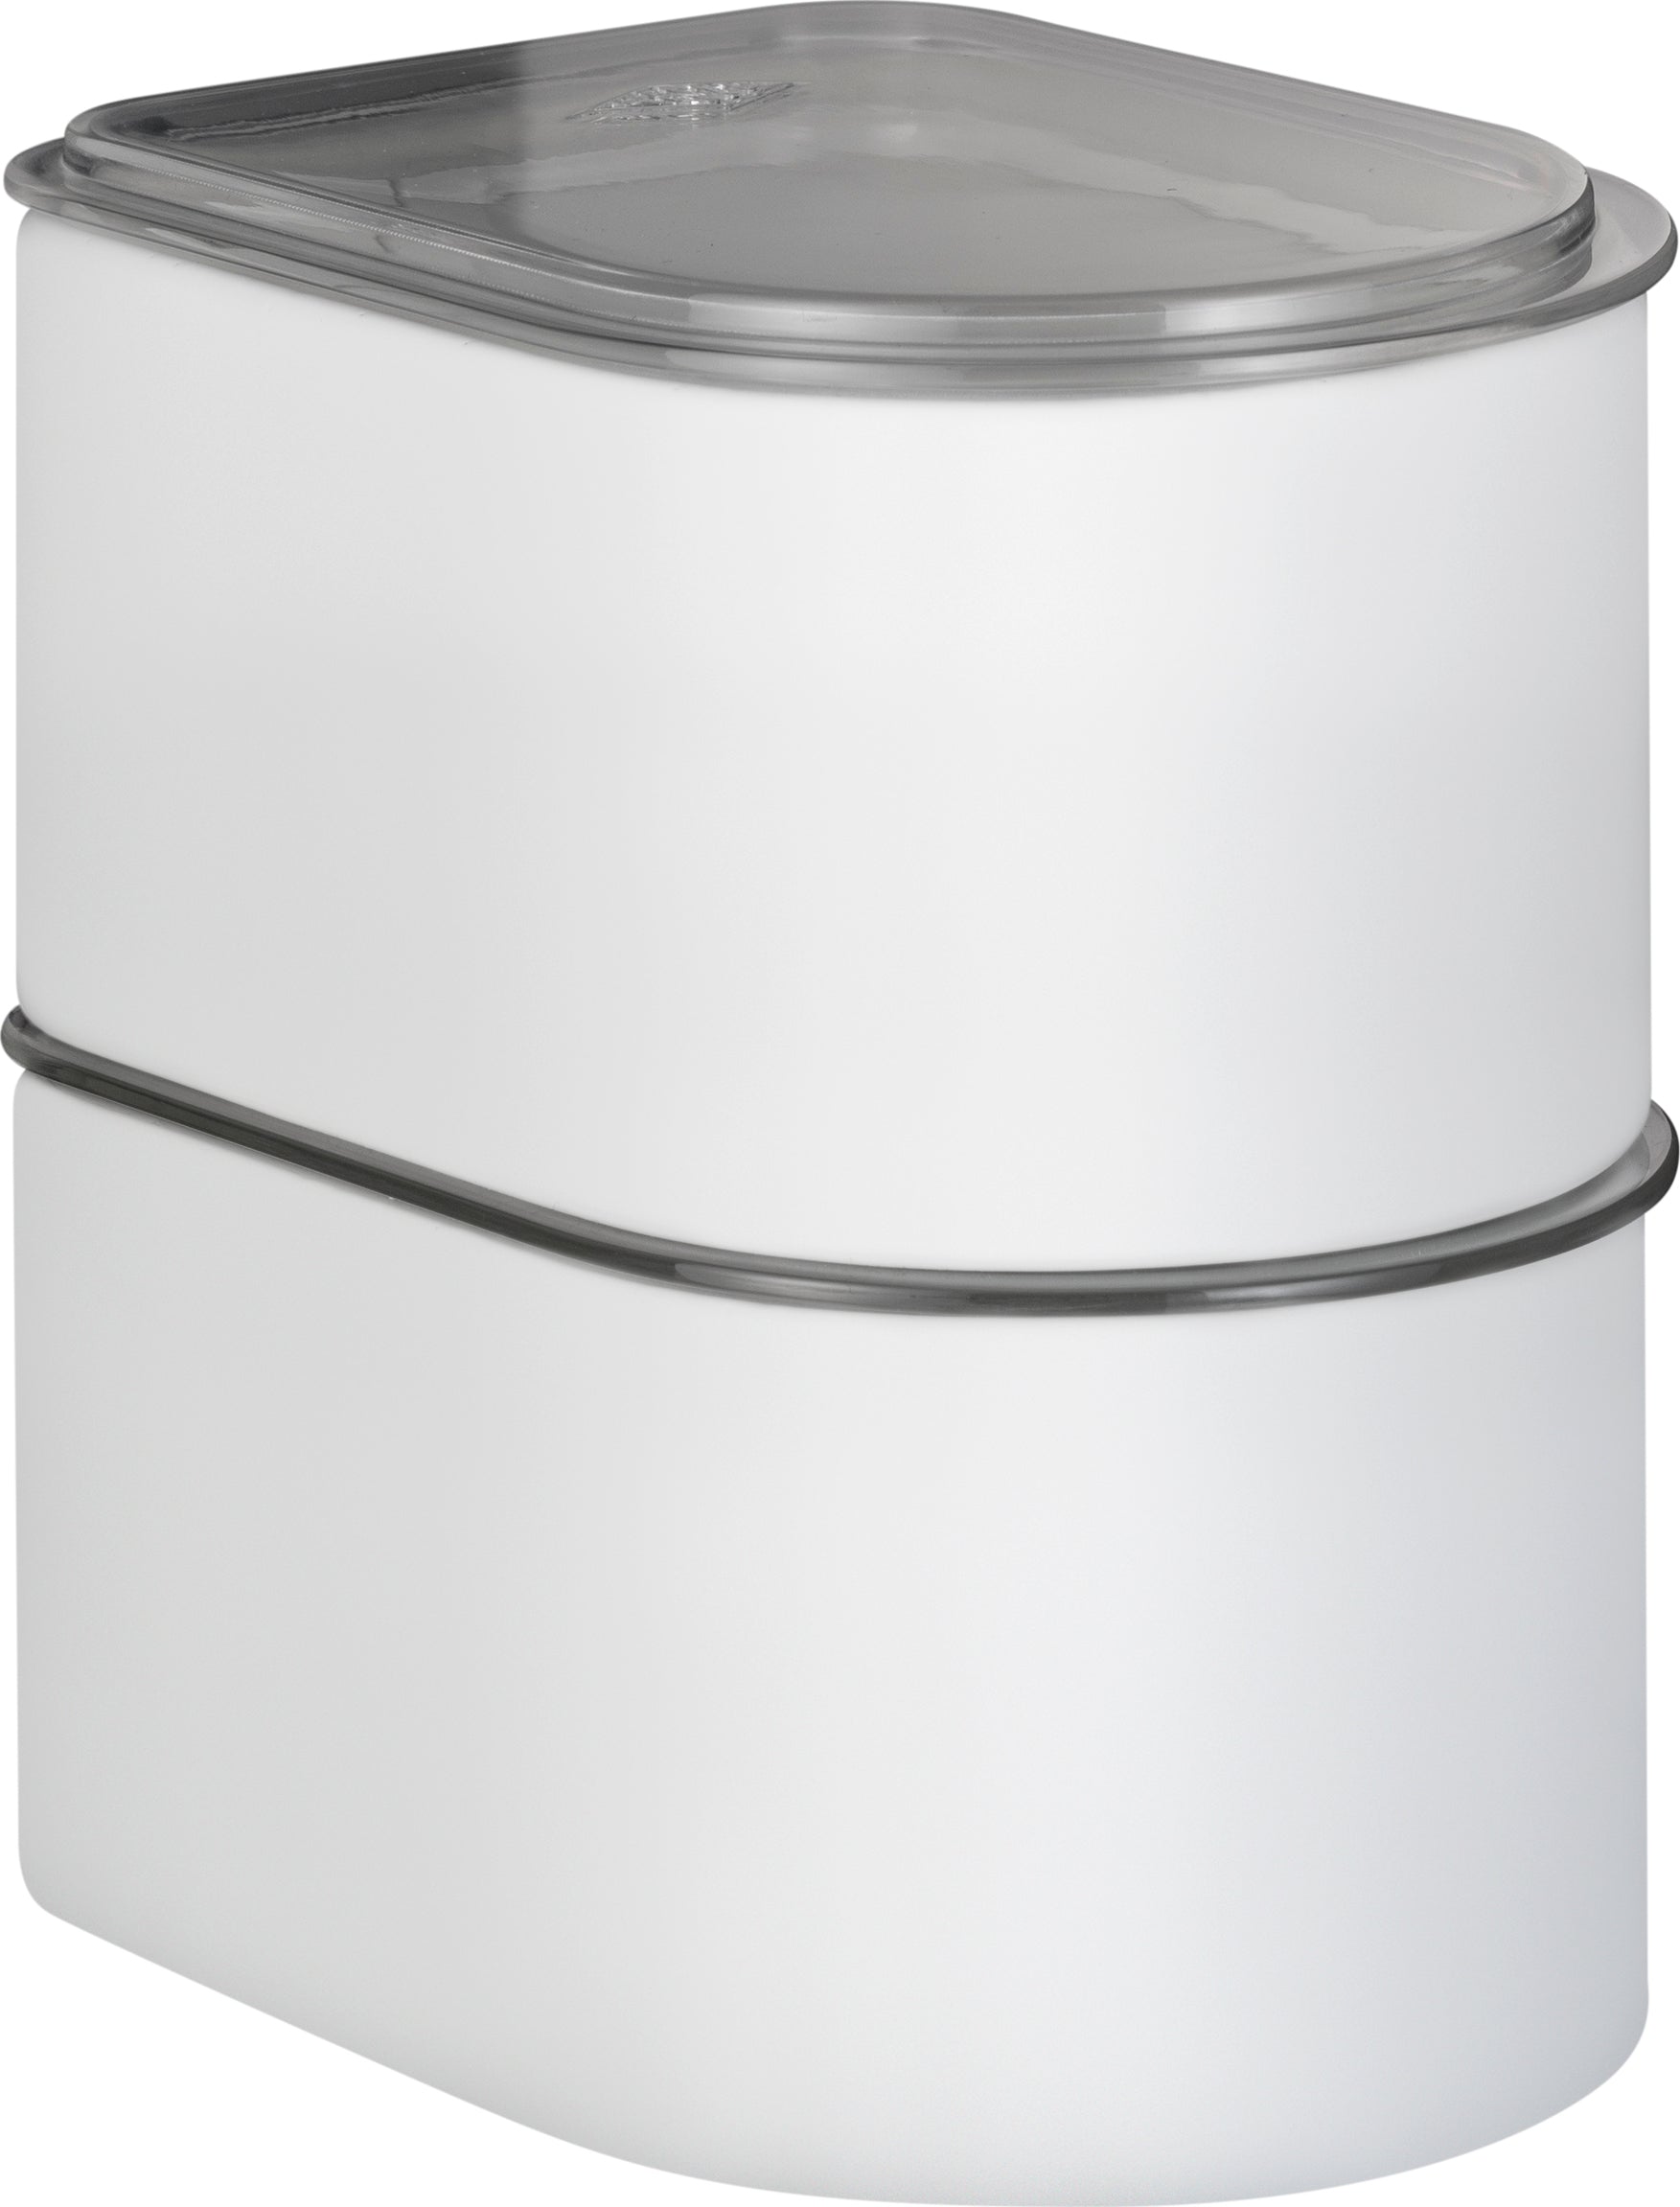 Wesco Canister 1 Litre With Acrylic Lid, Sand Matt